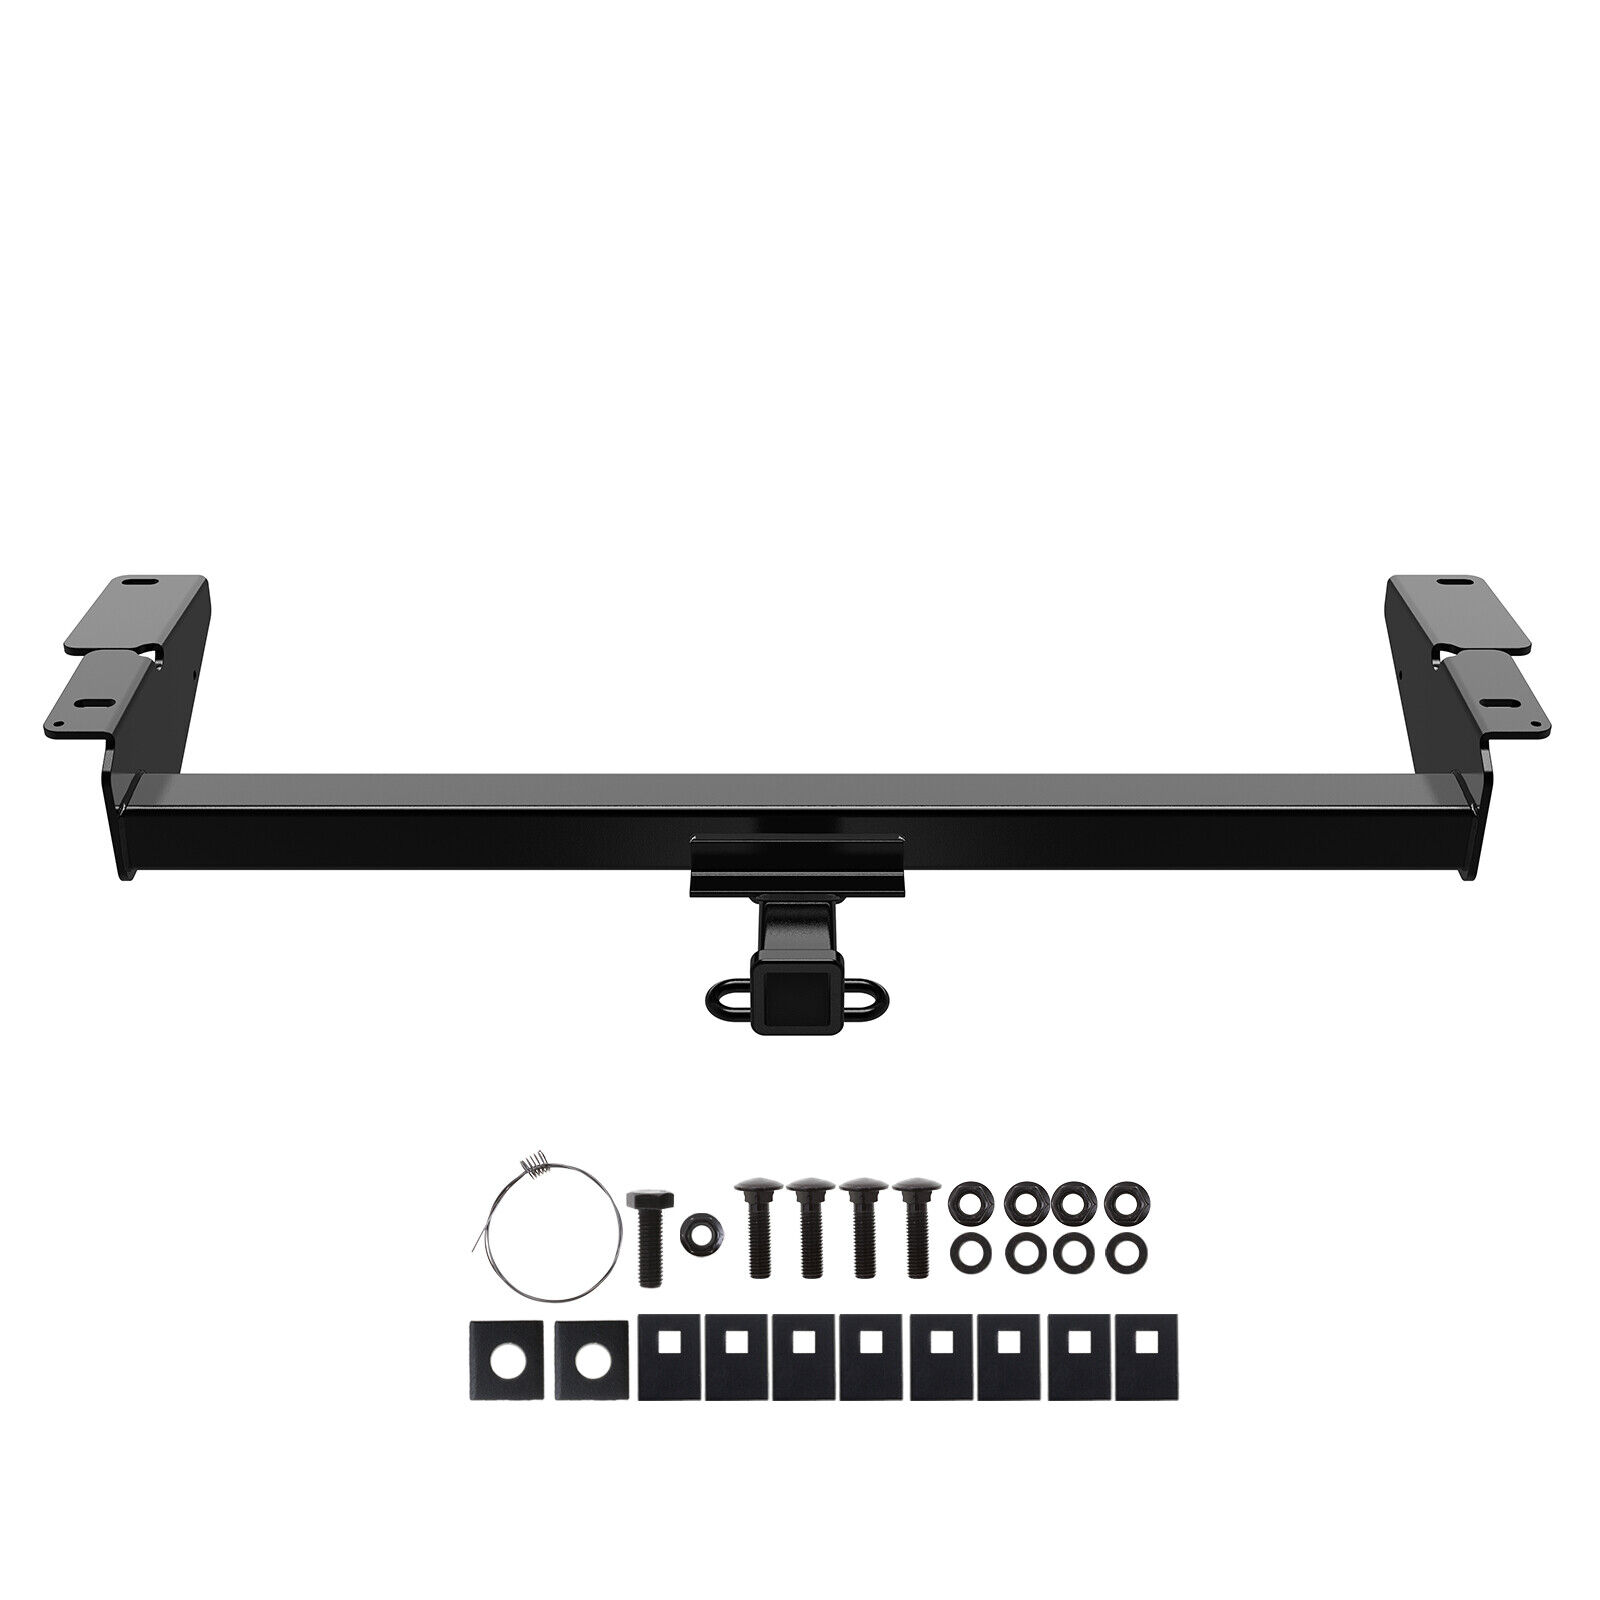 Trailer Towing Hitch 2 Inch Receiver fit Lincoln Town Car 1981-2011